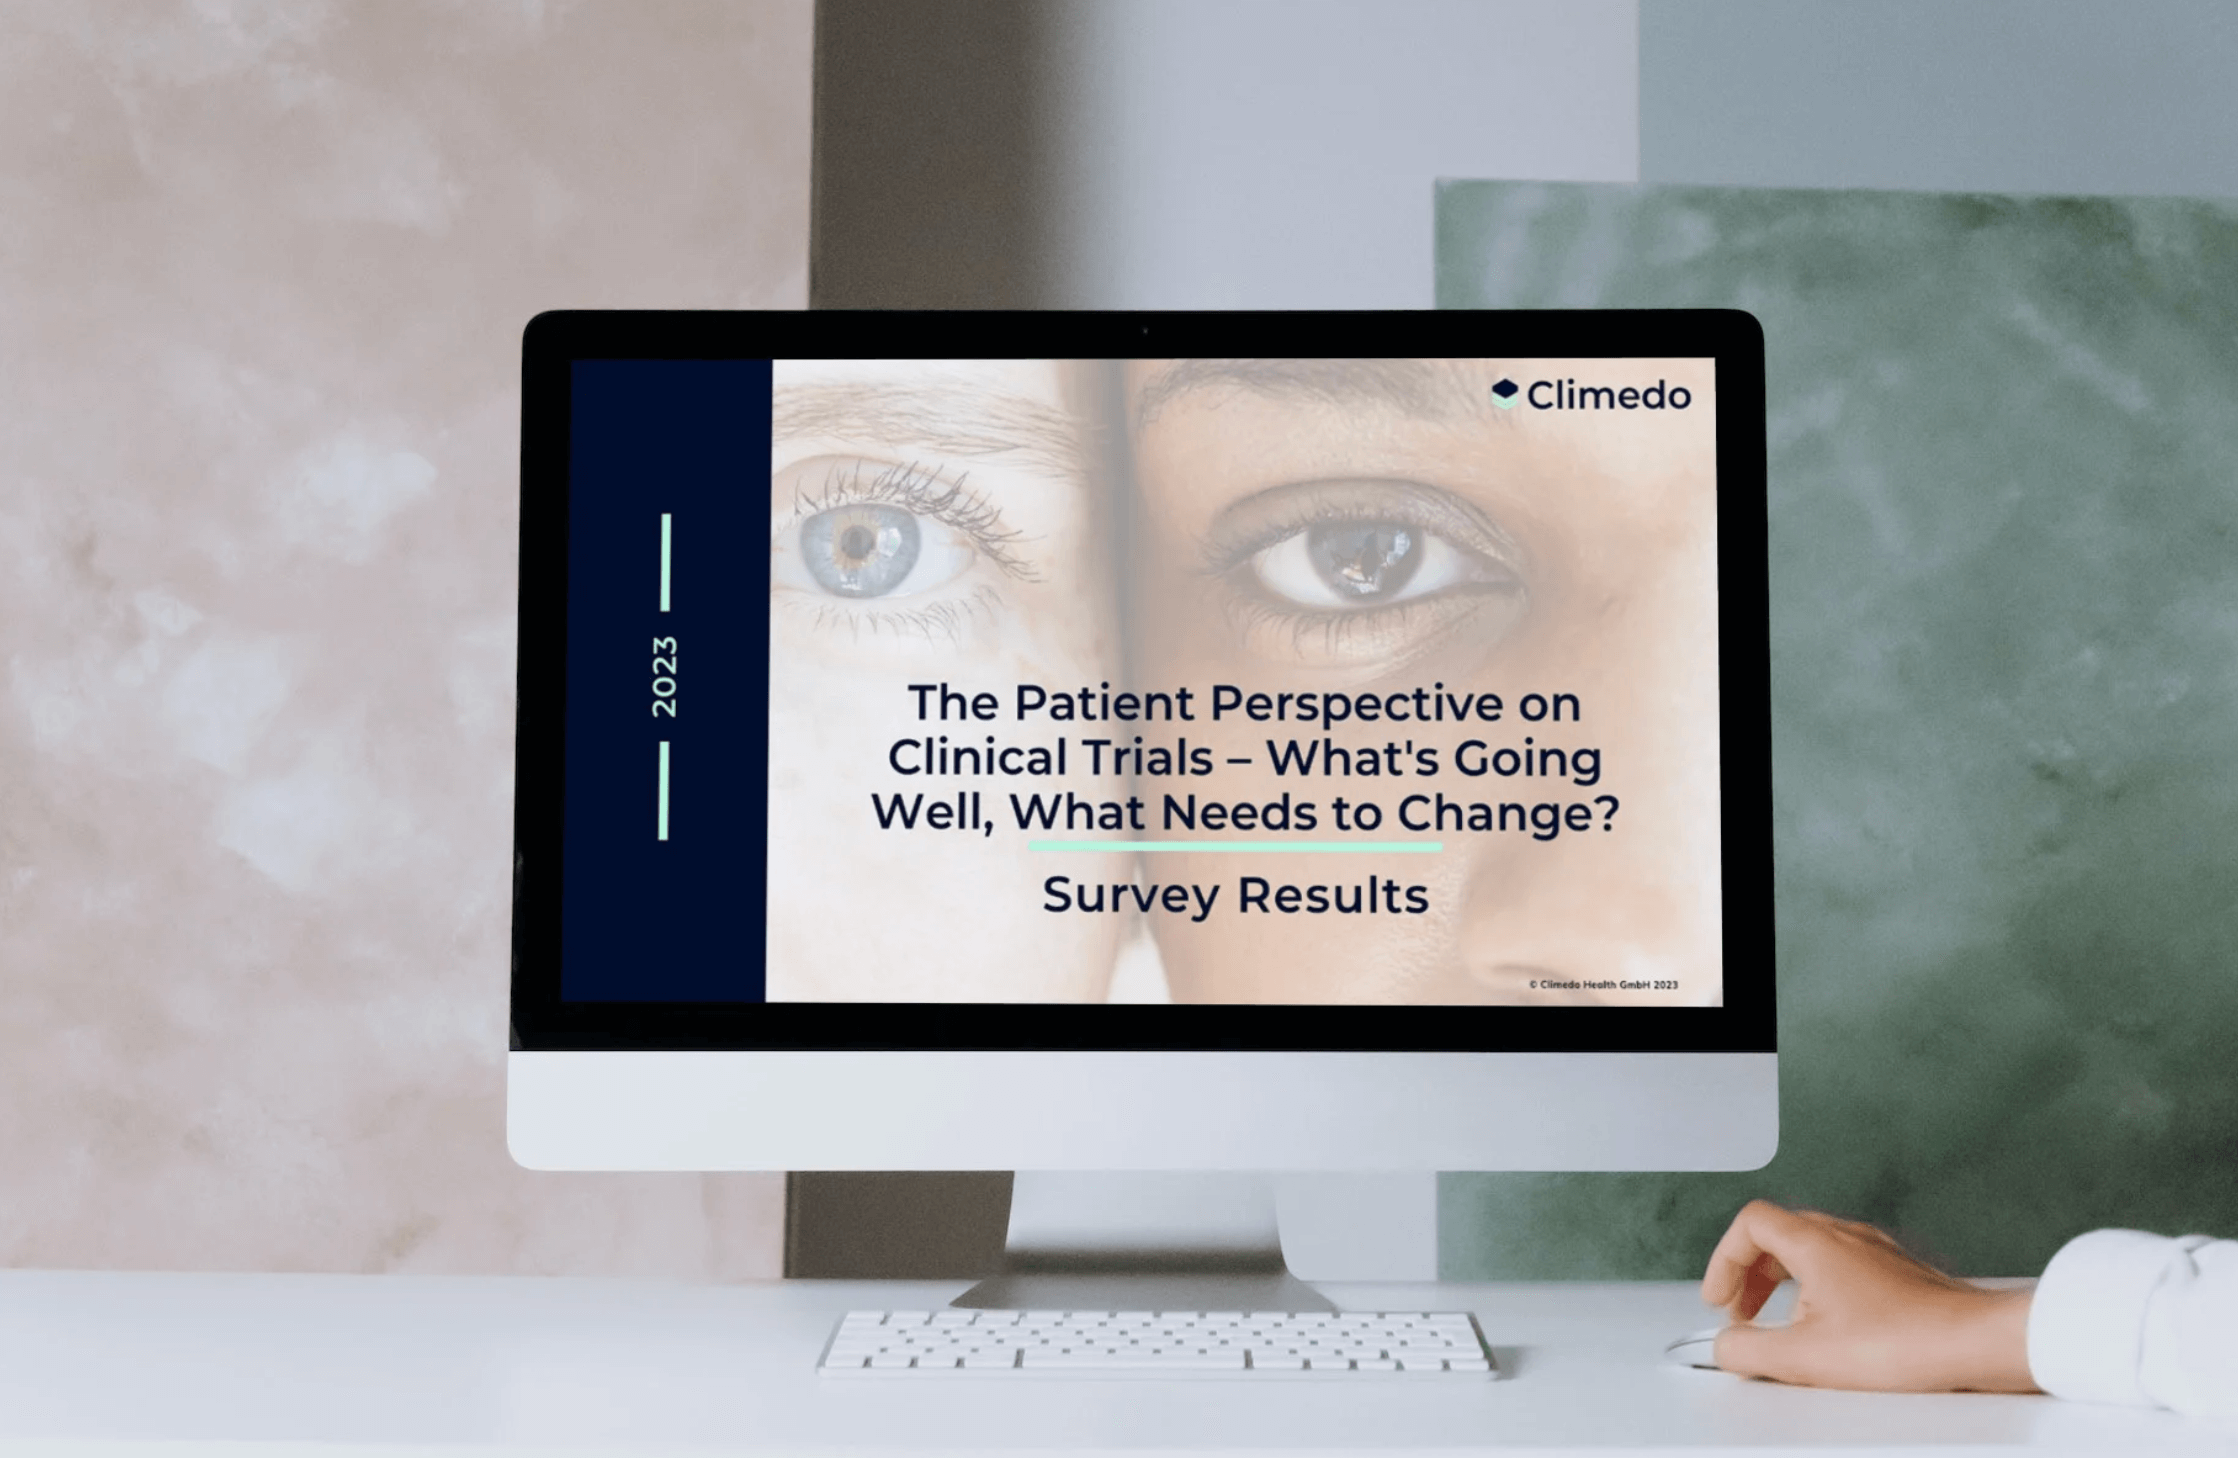 Survey Results: The Patient Perspective on Clinical Trials